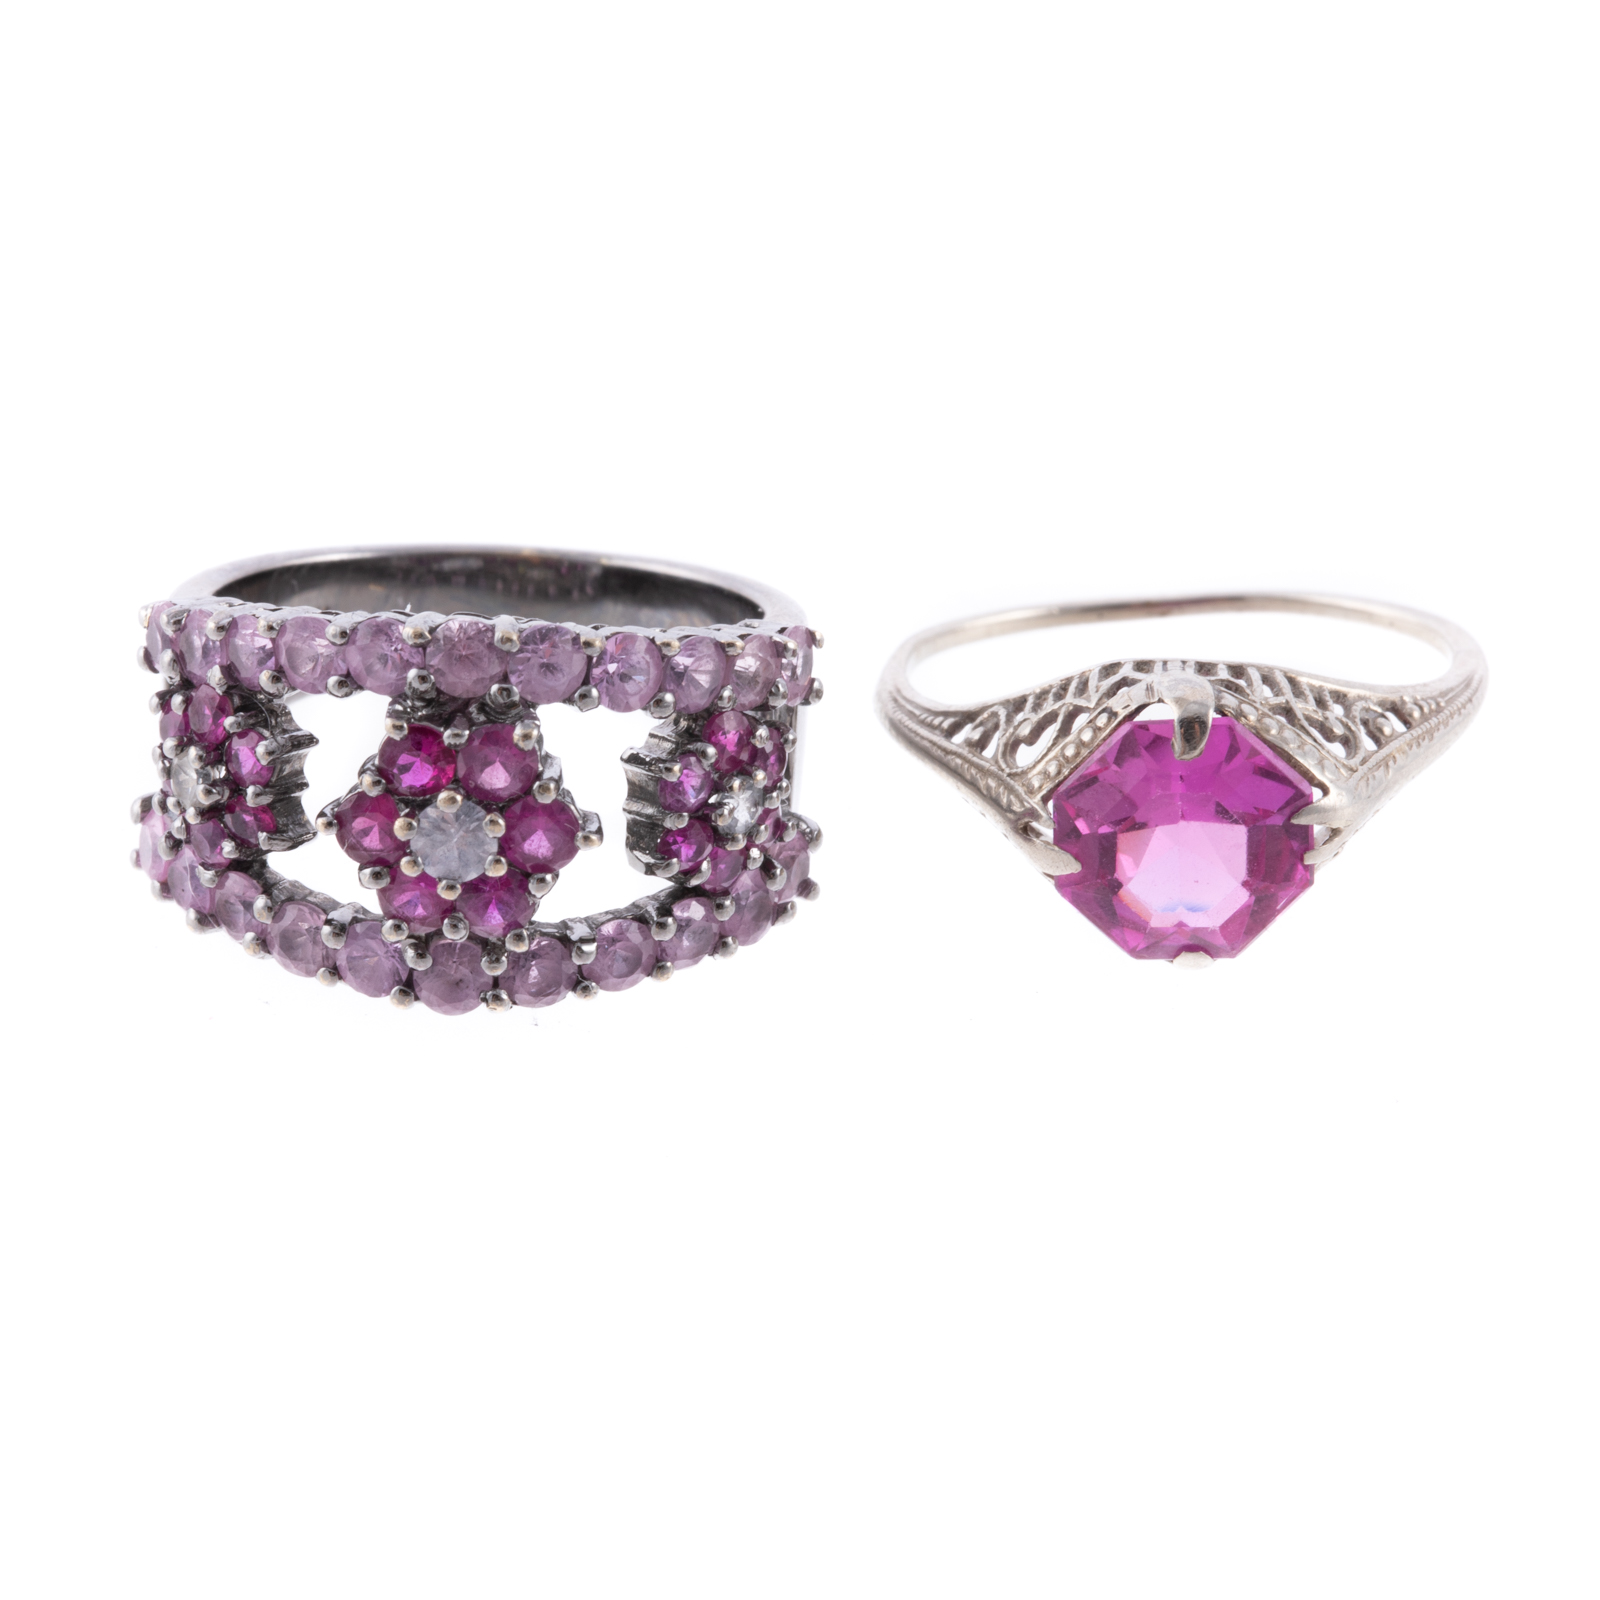 TWO PINK STONE RINGS IN 18K & 14K